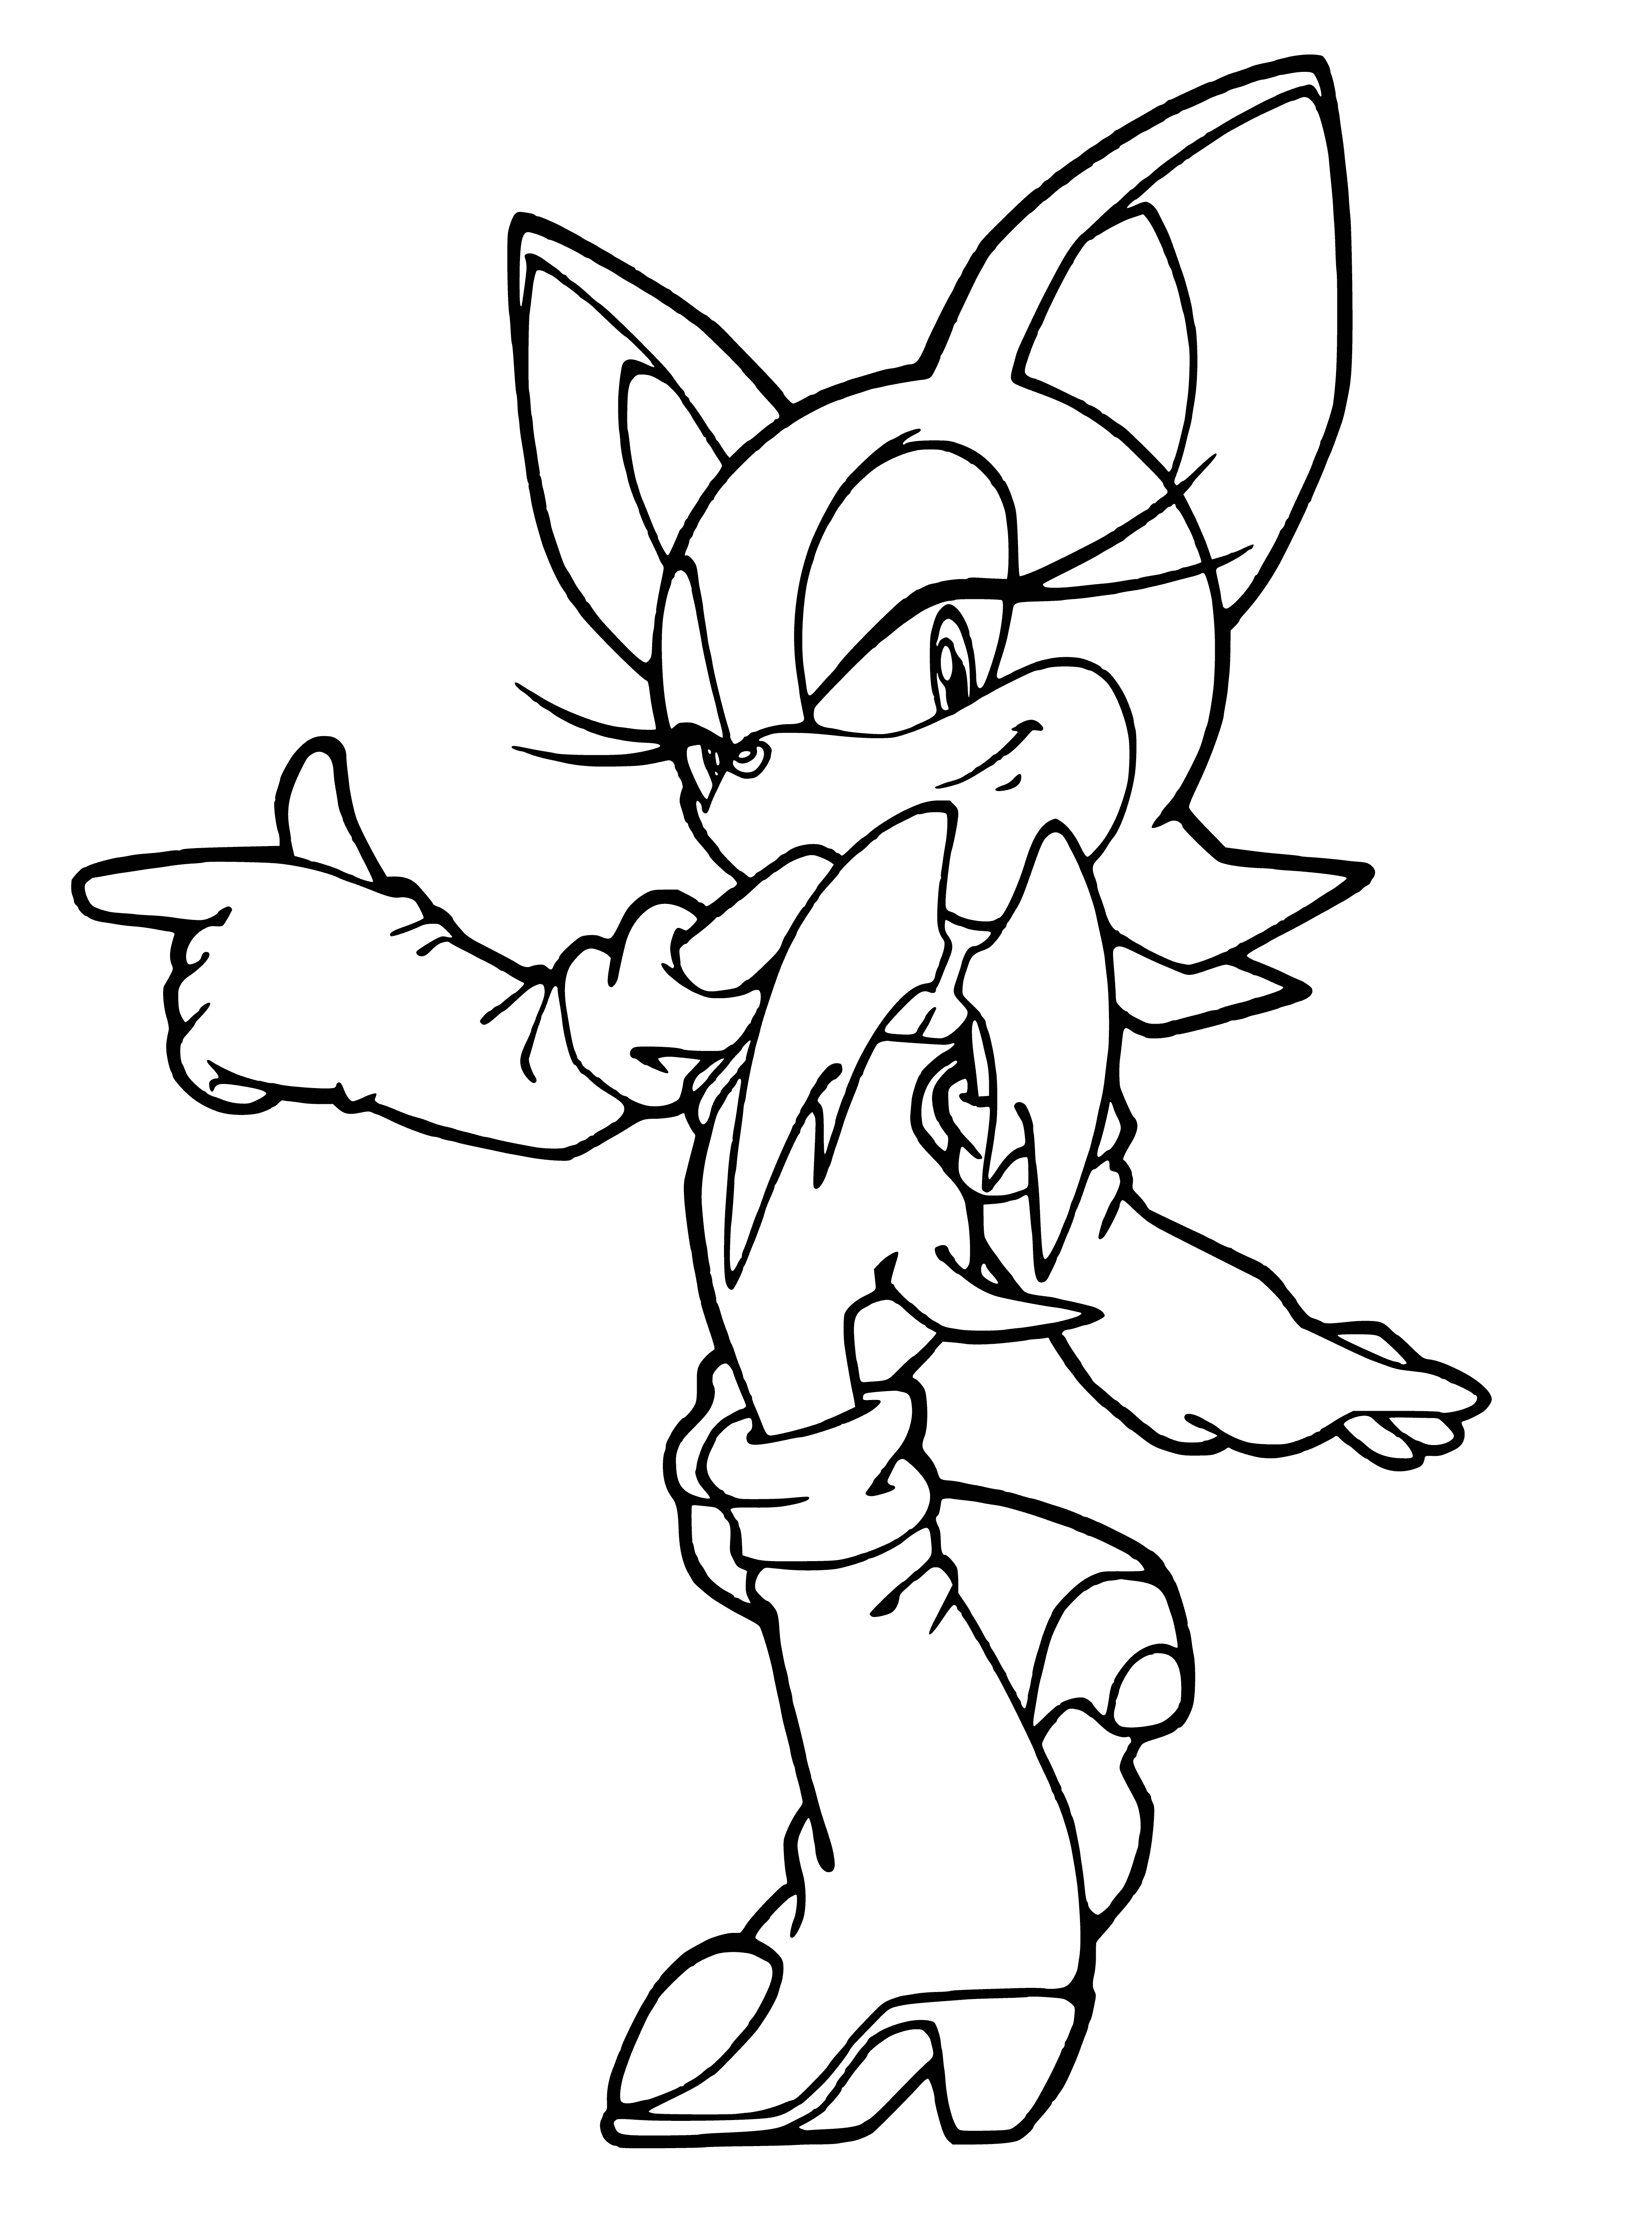 coloring page: Rouge is a purple bat-like creature with red eyes and a sharp dress. She uses her charm to win over her foes in the Sonic X series.